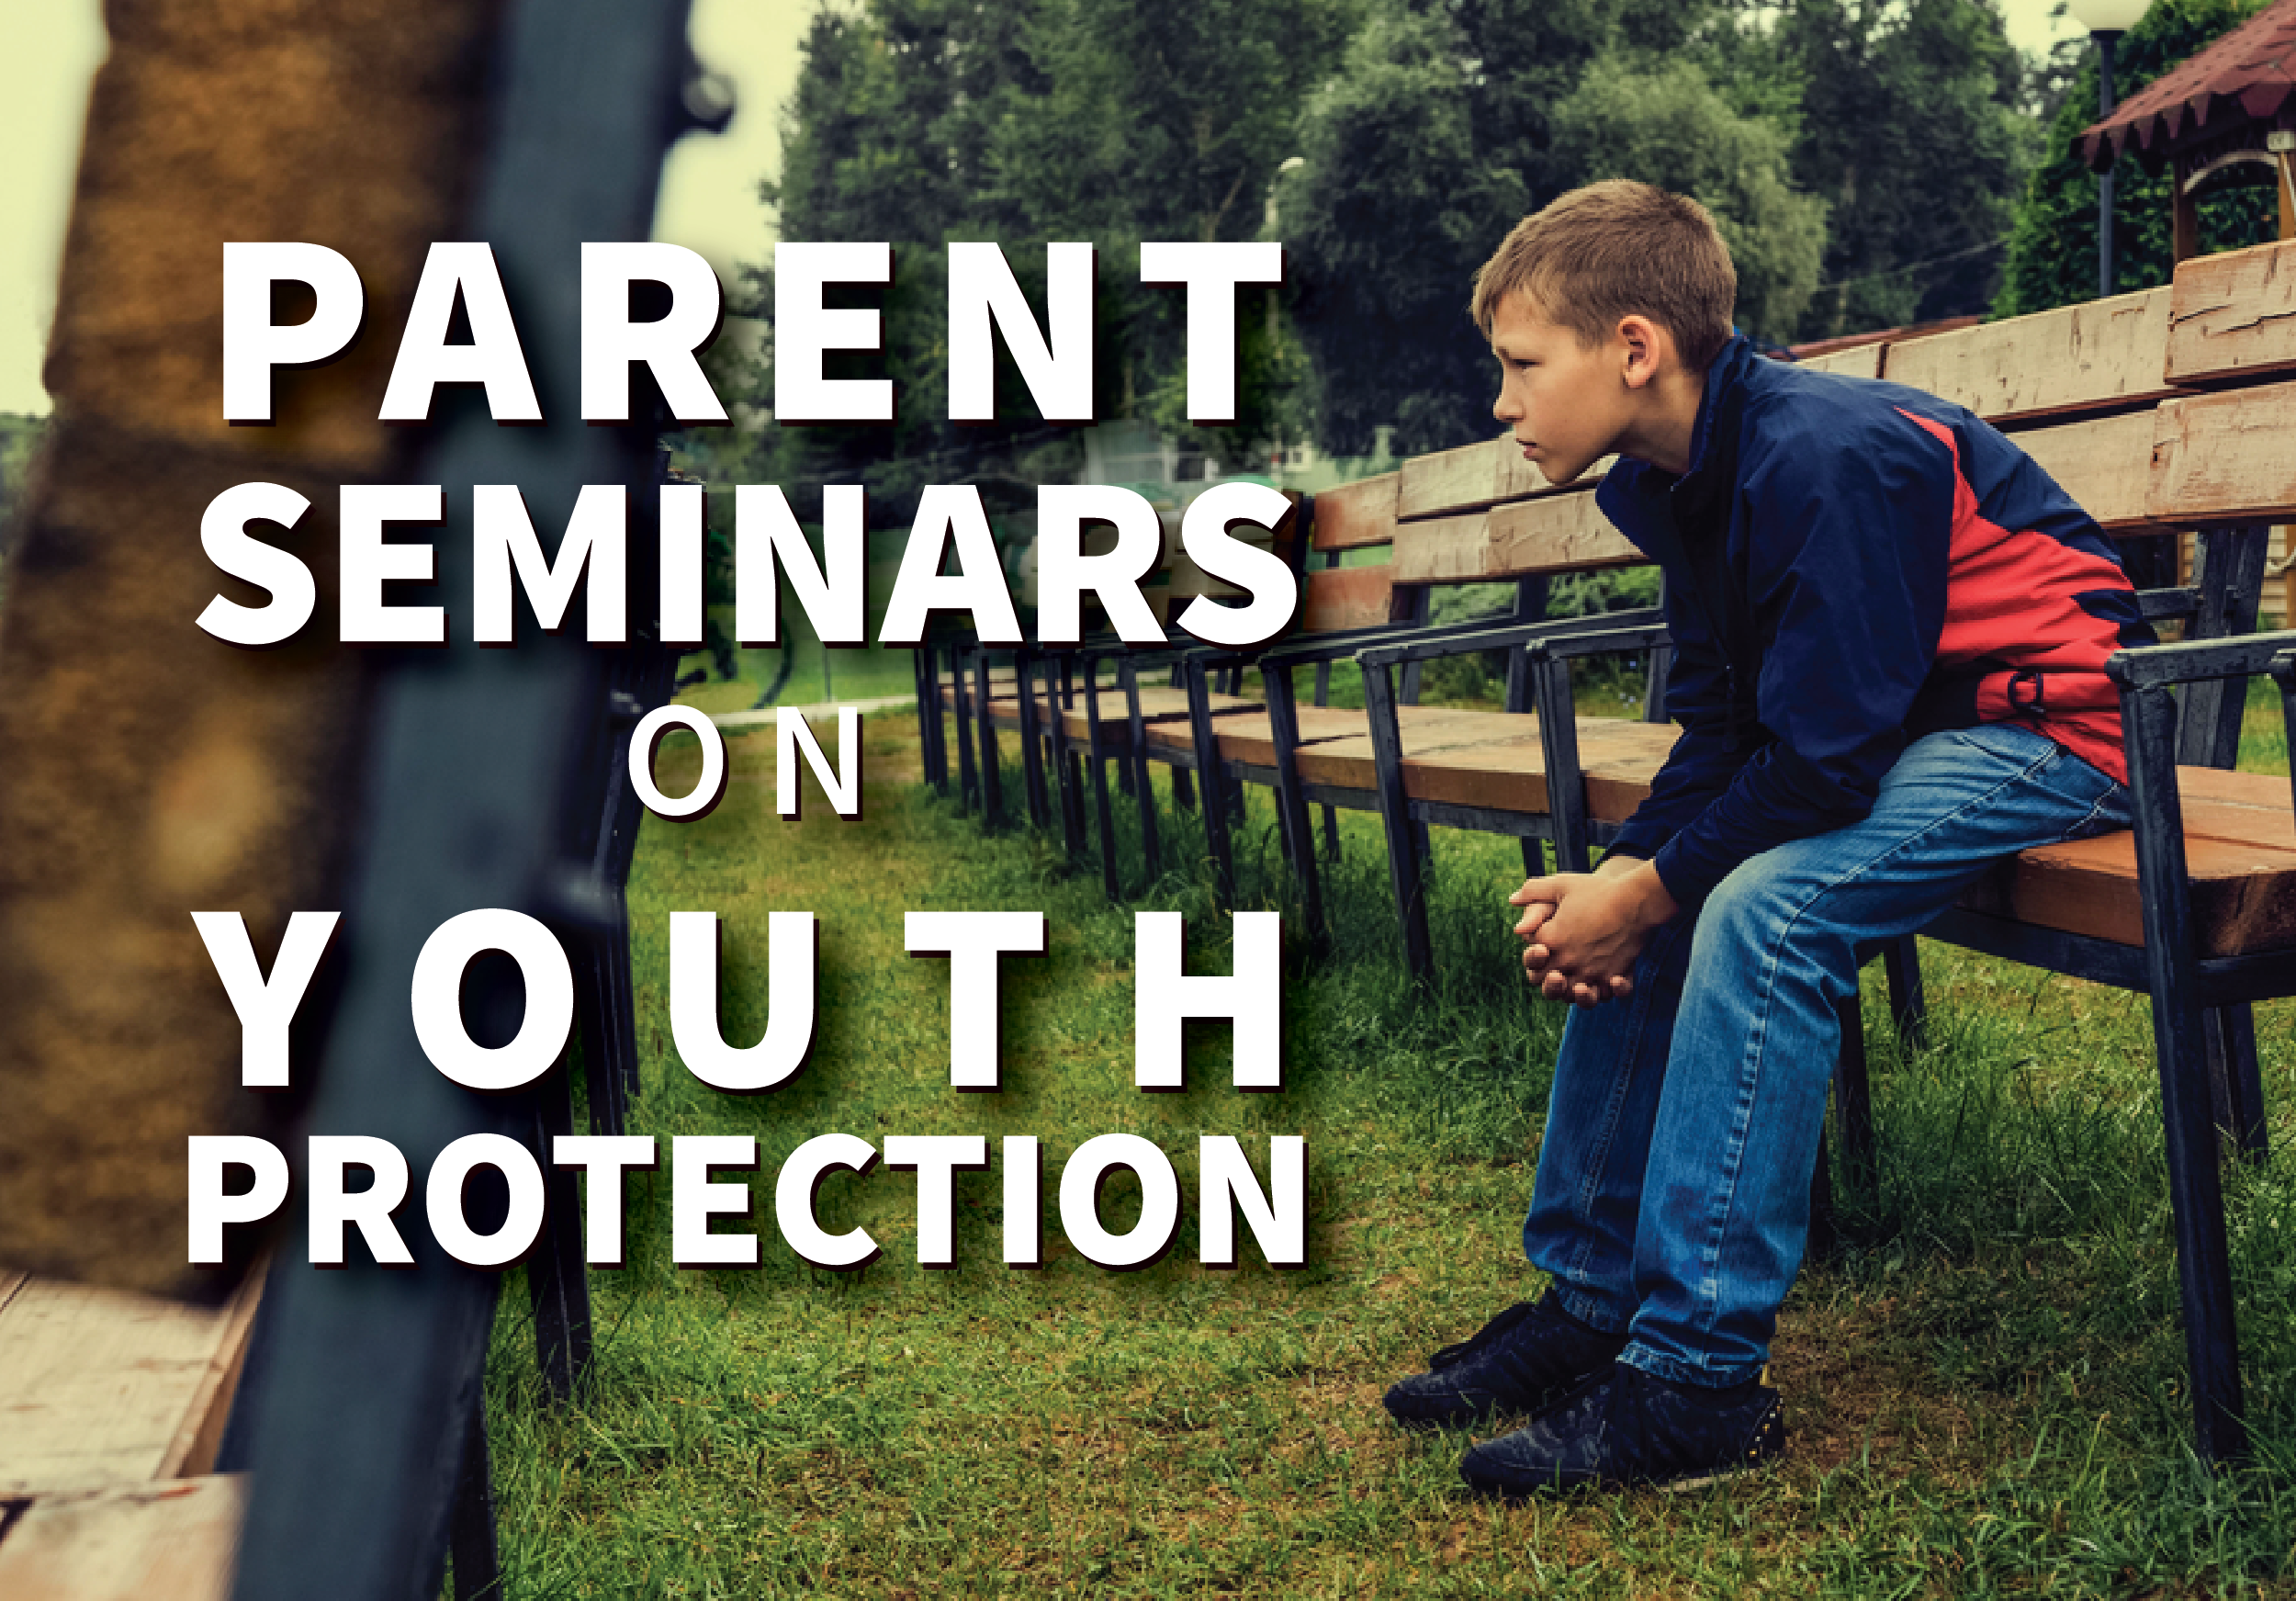 District hosting multiple parent seminars on youth protection